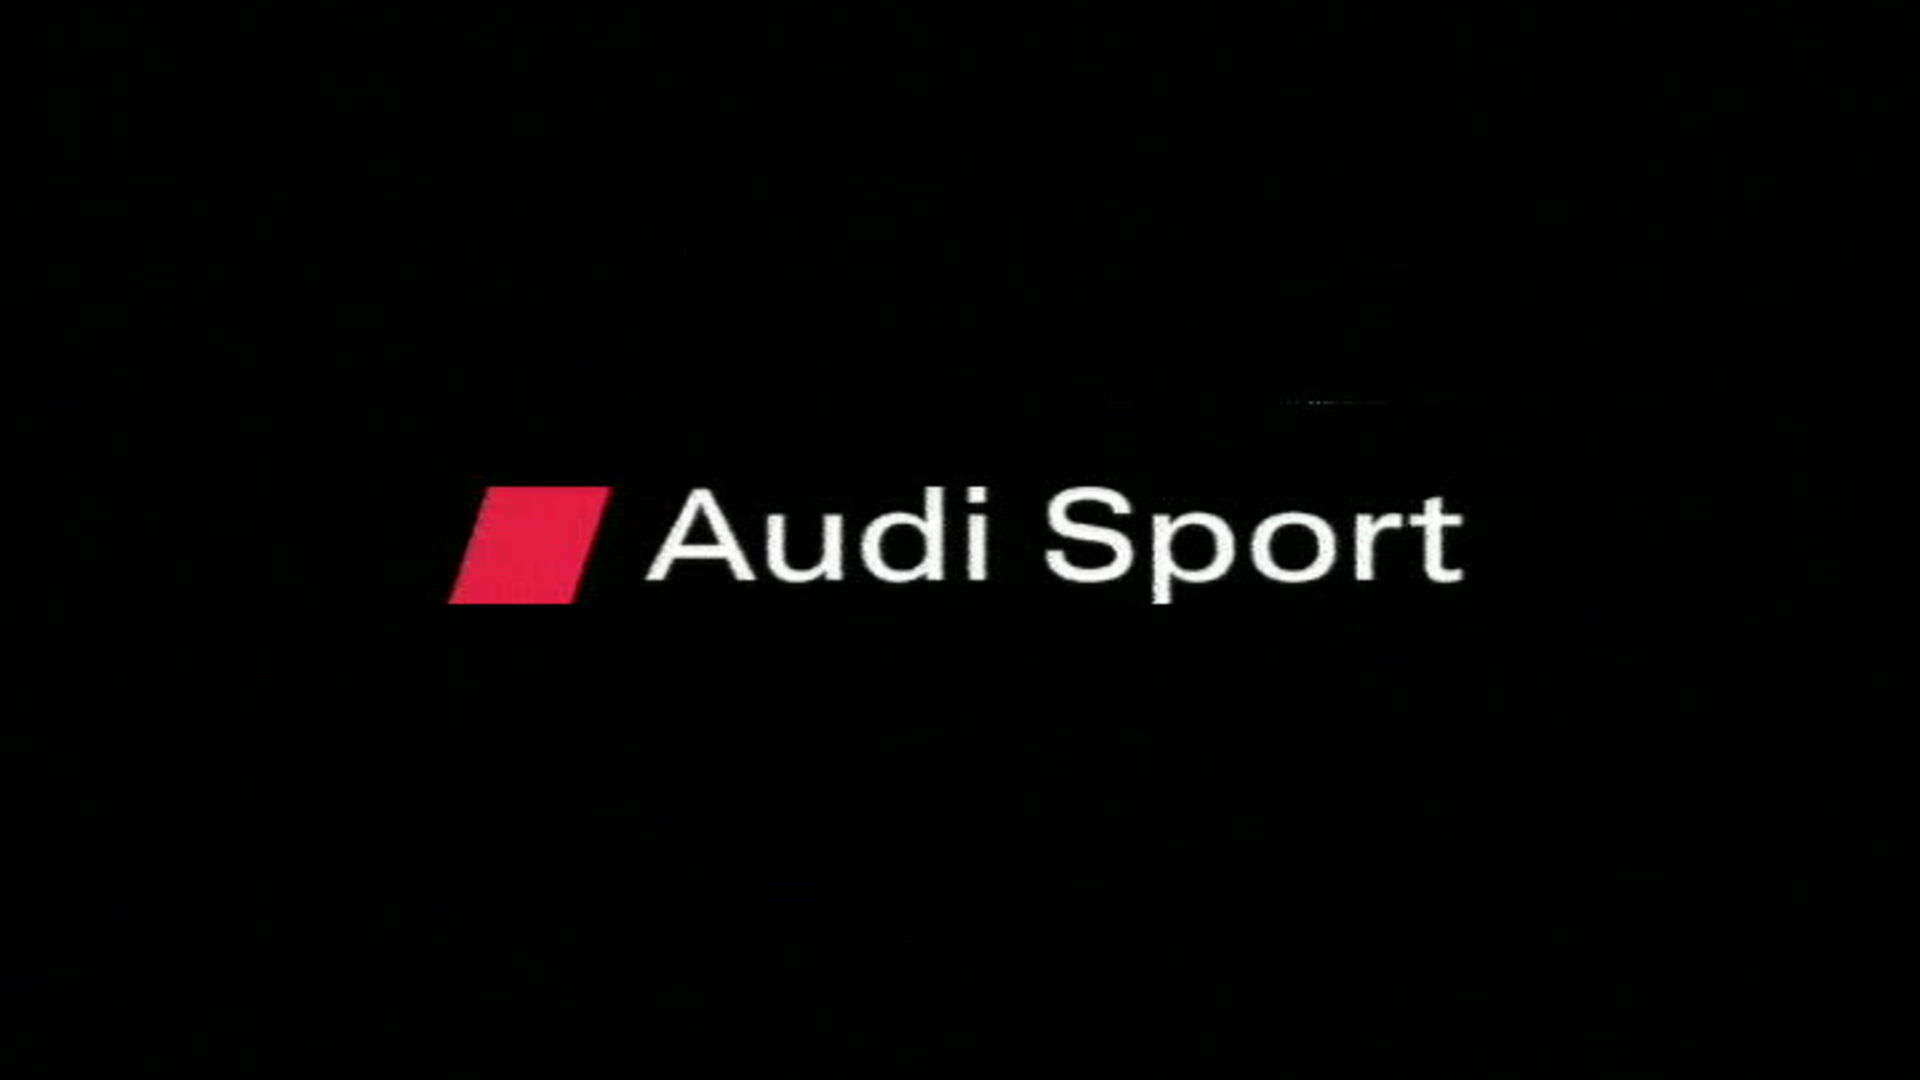 Audi R10 TDI – Development of engine and chassis